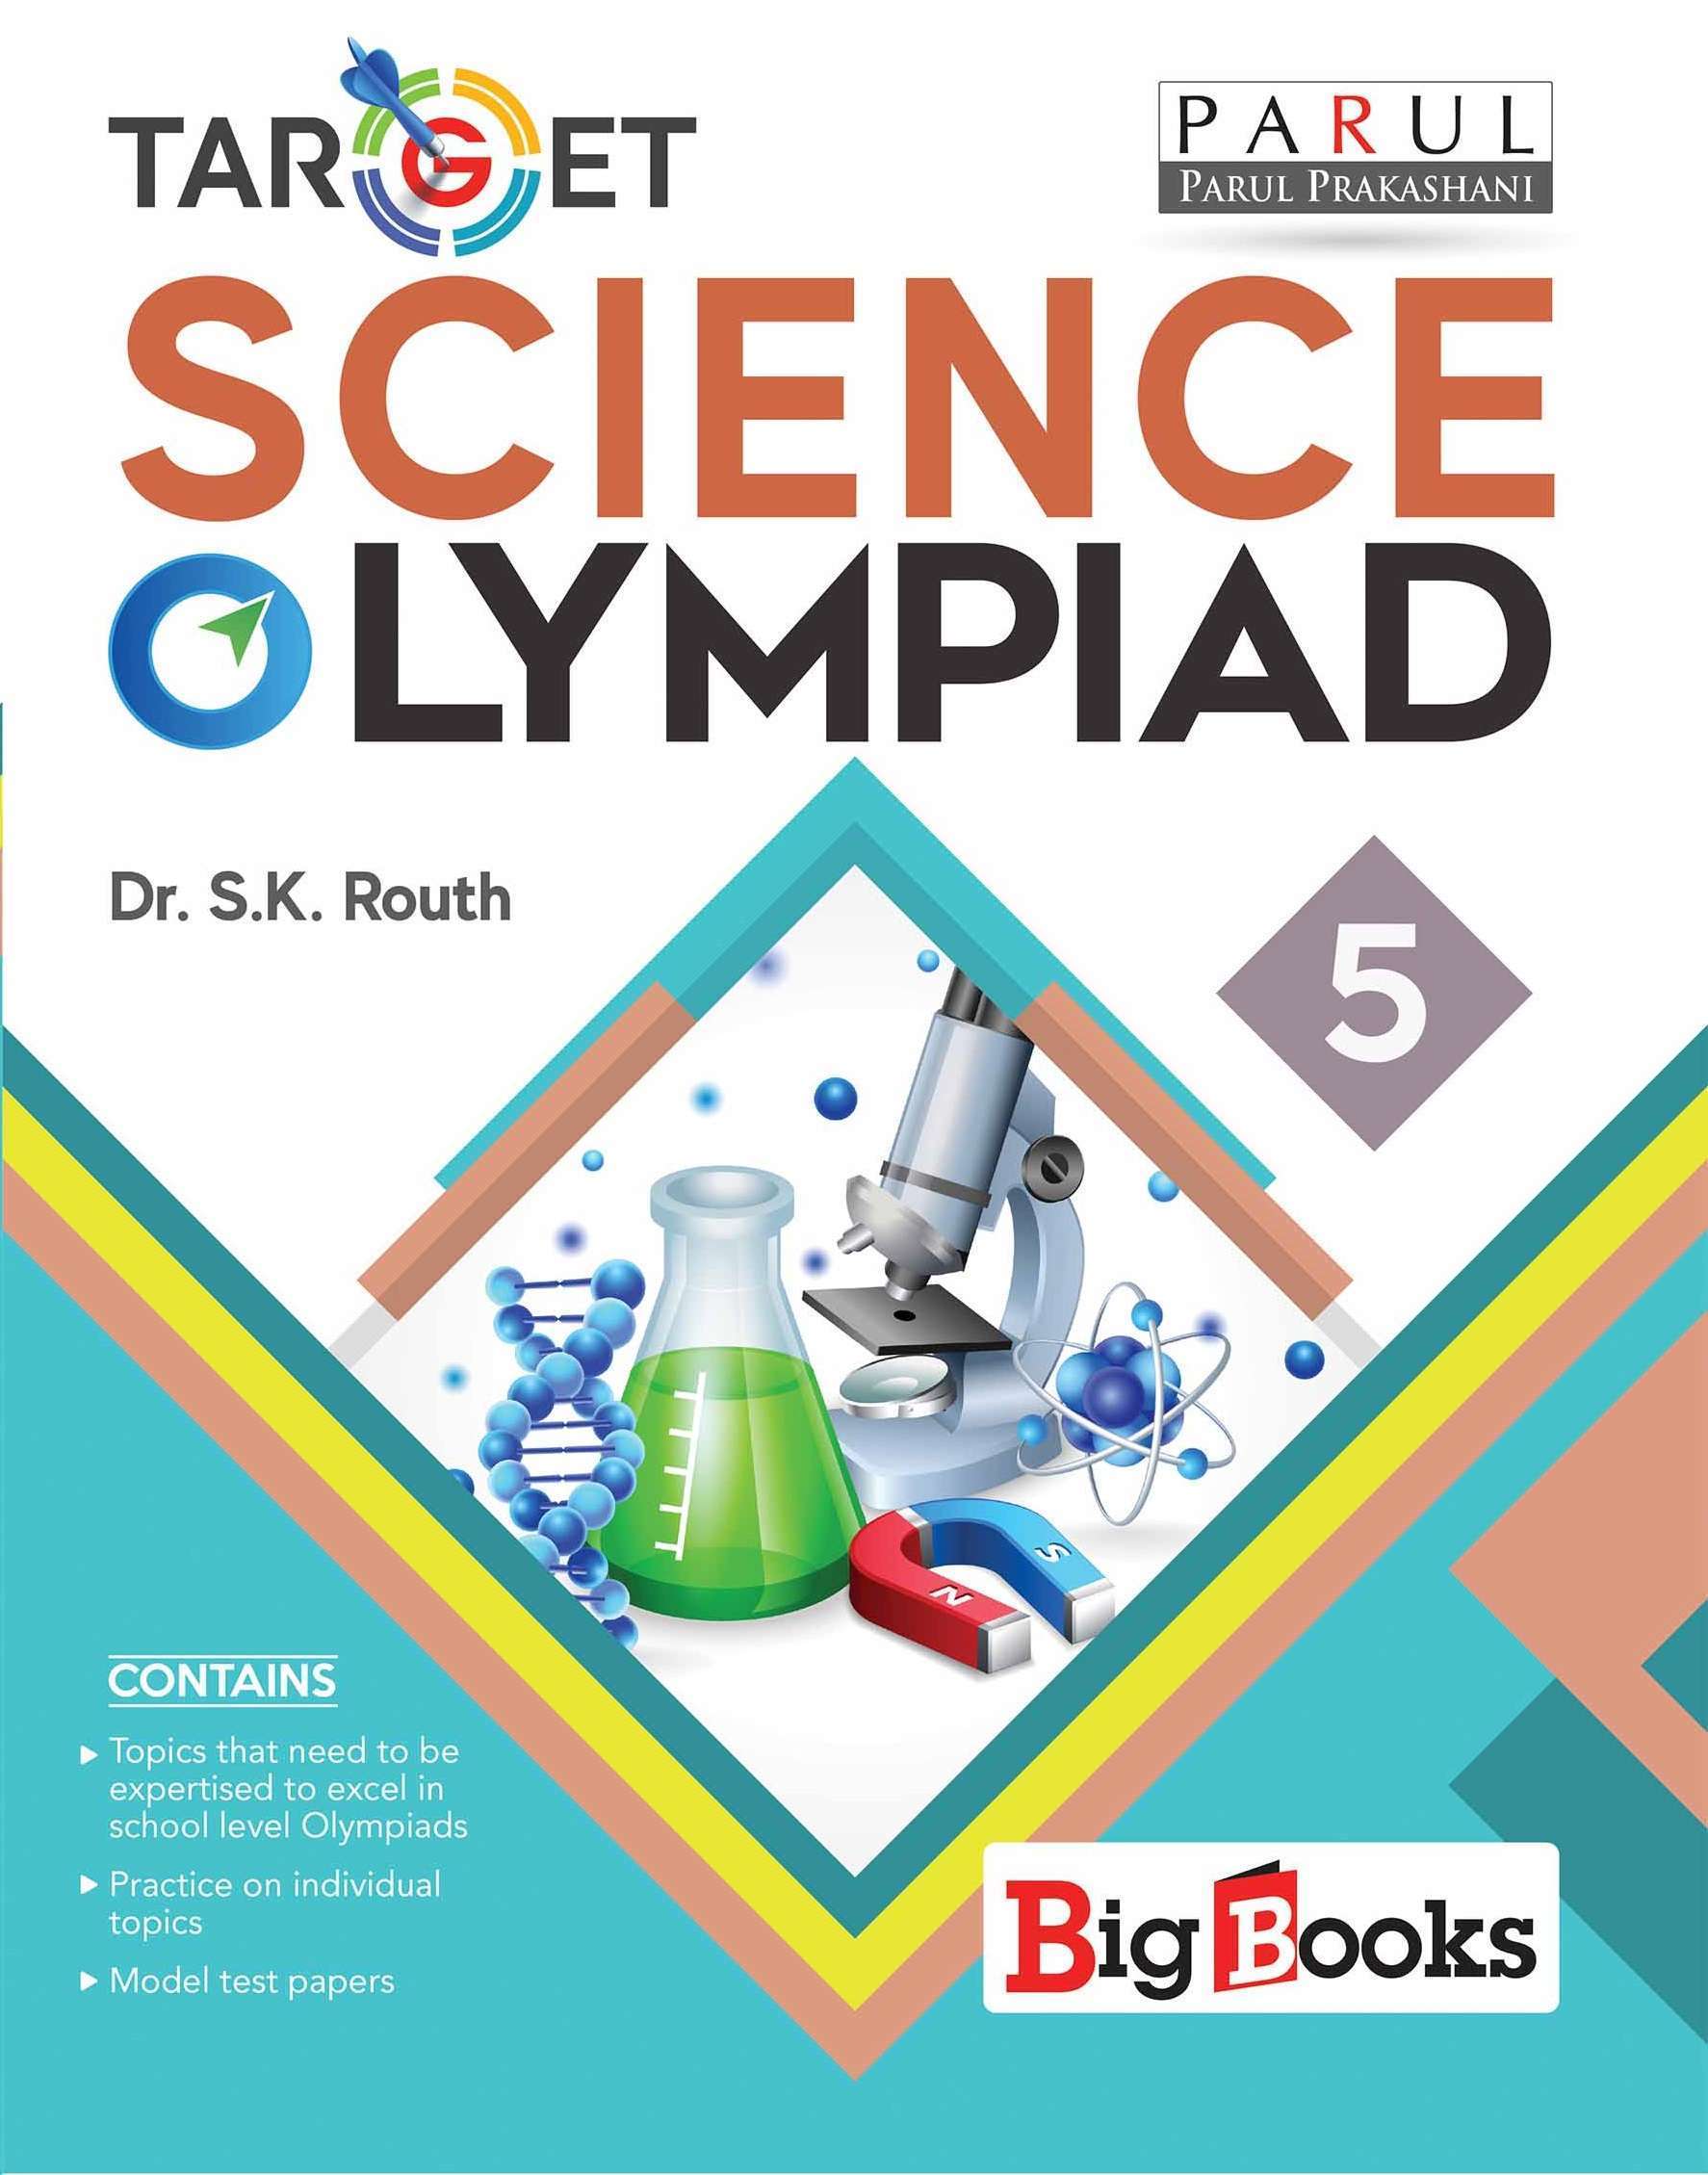 Buy Science Olympiad book for 5